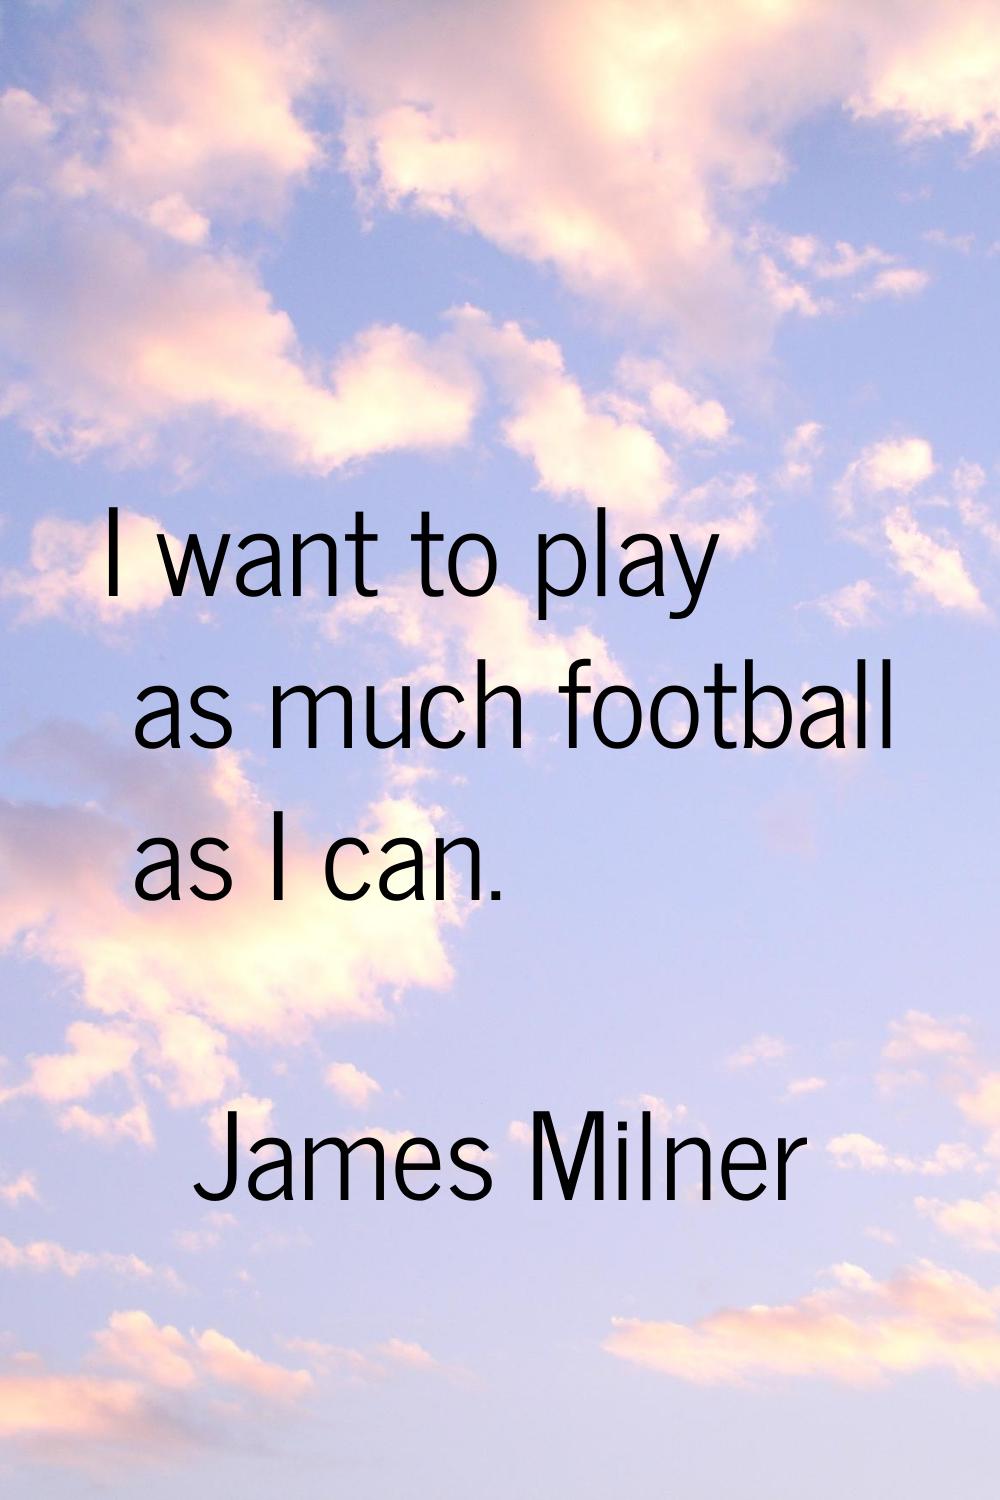 I want to play as much football as I can.